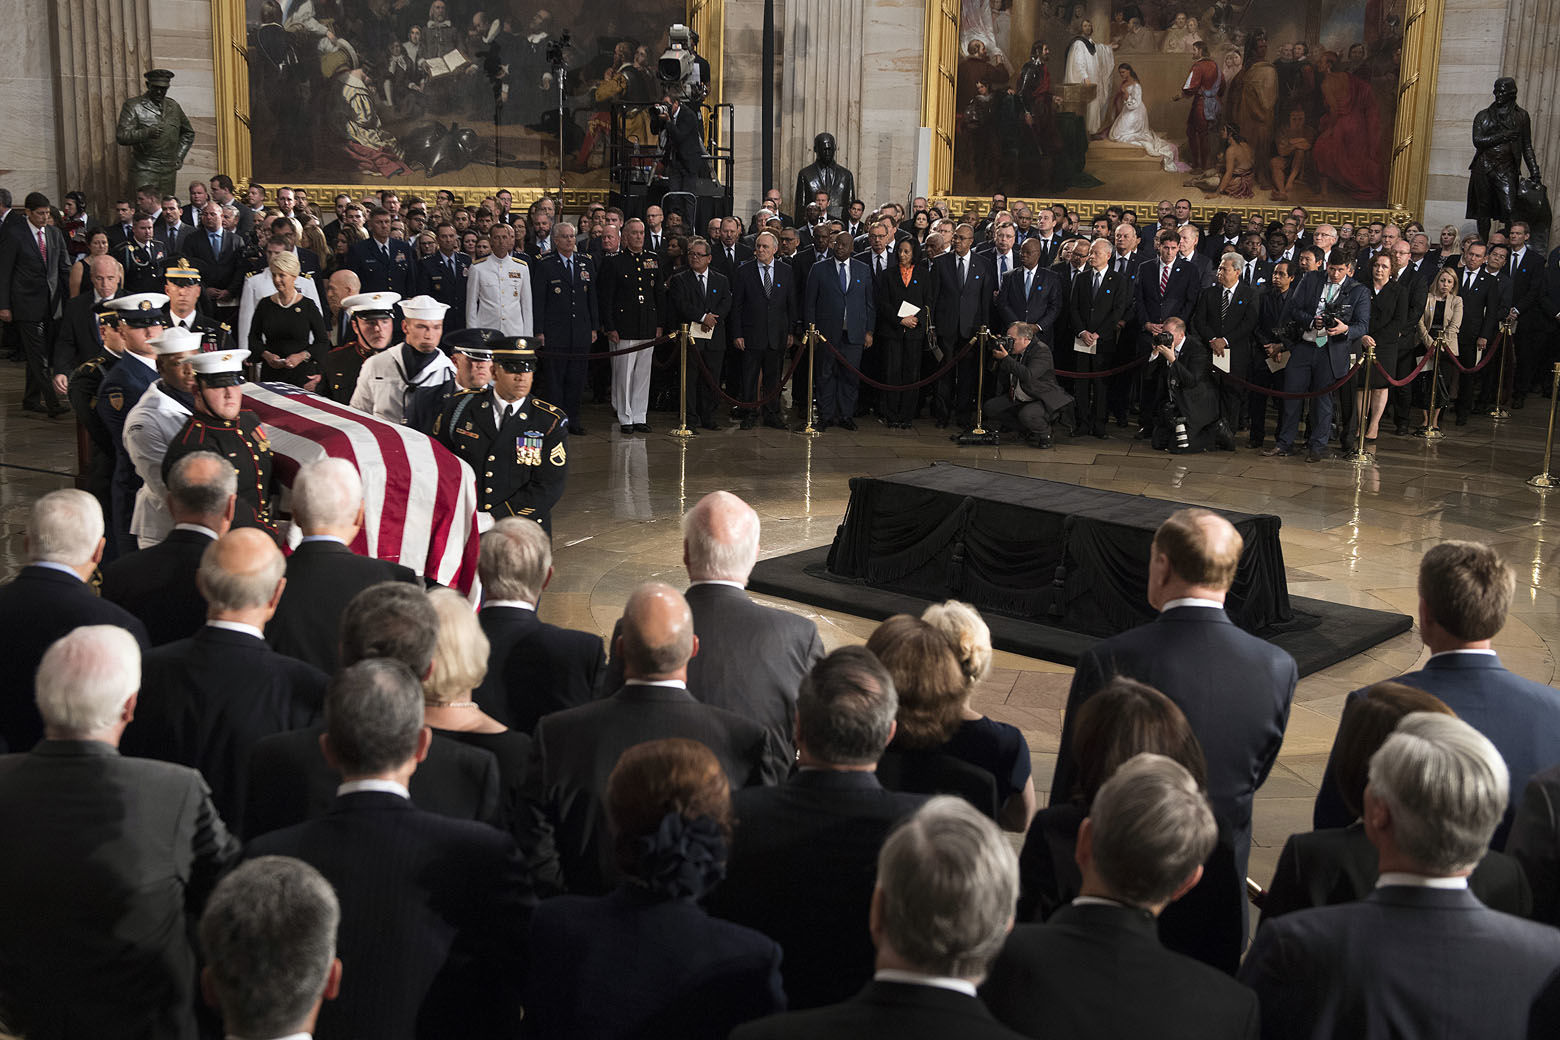 The flag-draped casket of Sen. John McCain, R-Ariz., is carried into the U.S. Capitol Rotunda Friday, Aug. 31, 2018, in Washington, to be placed on the Lincoln Catafalque. (Jim Watson/Pool Photo via AP)